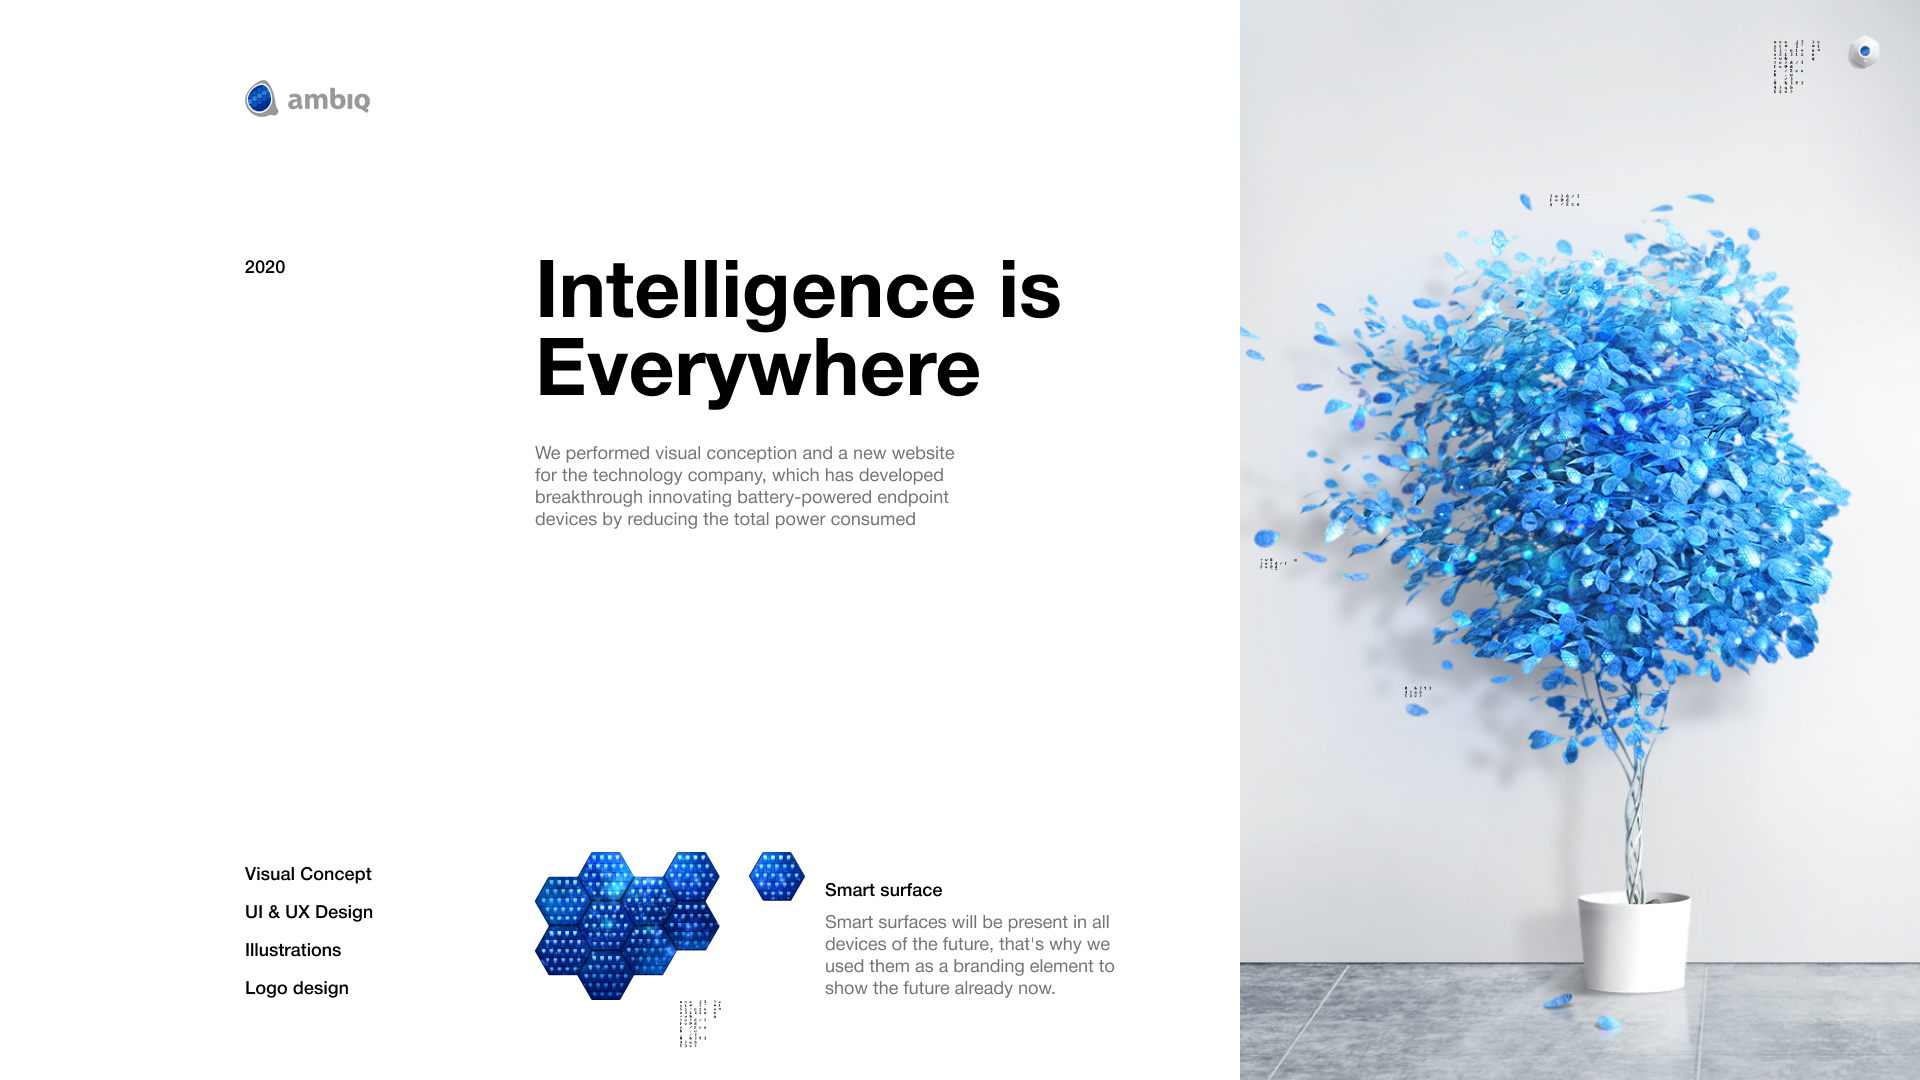 Visual idea and copy for a website describing that Intelligence is everywhere